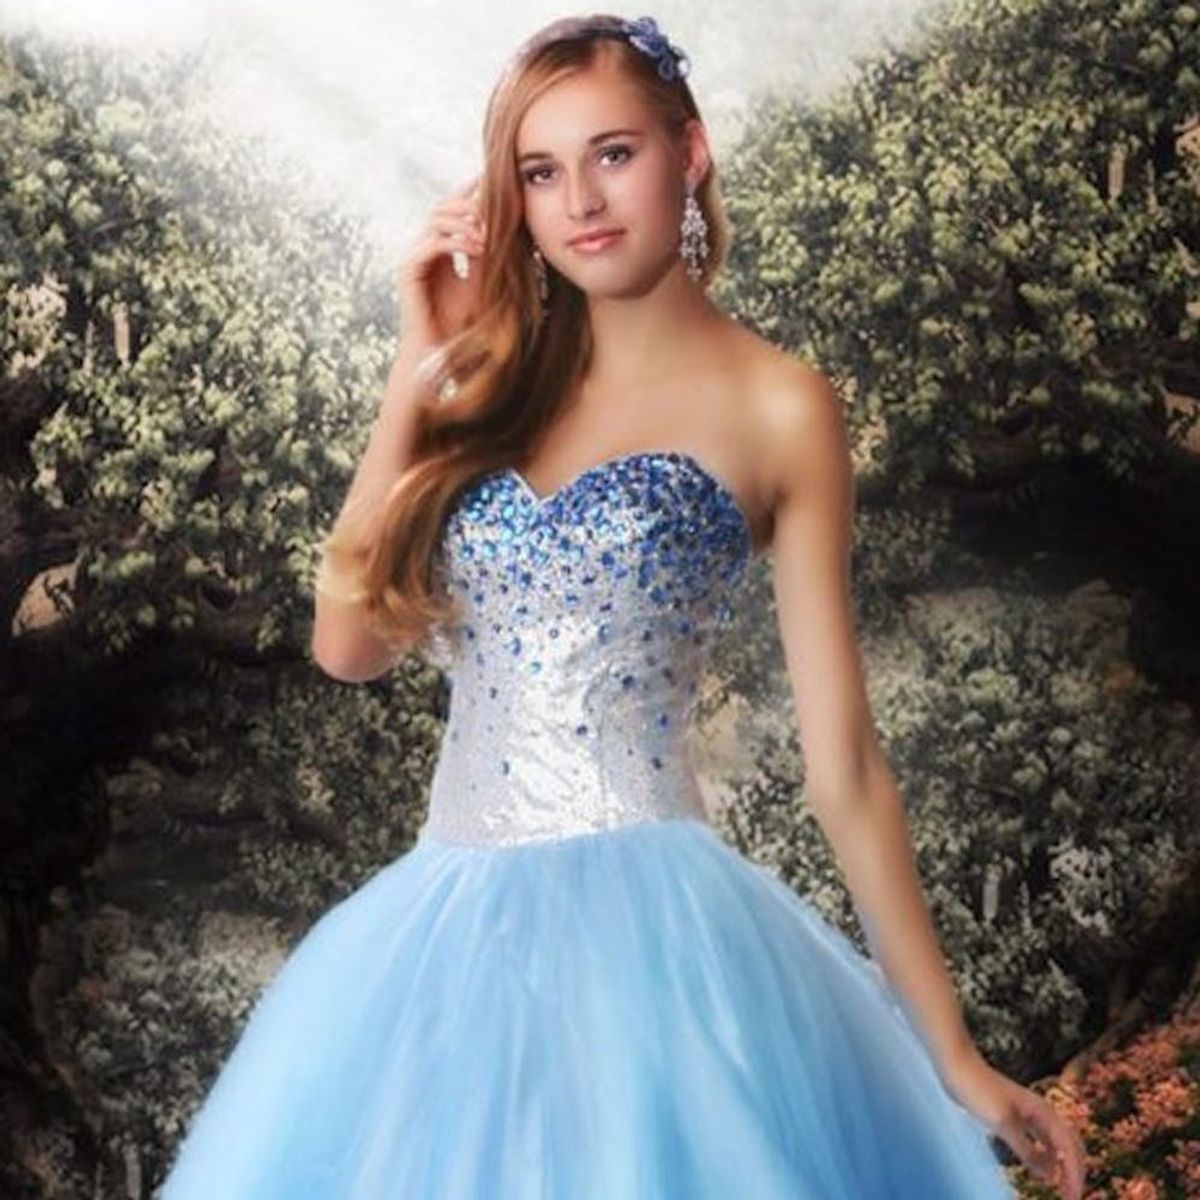 Make Your Prom Night Enchanting With These Disney Princess-Themed Gowns